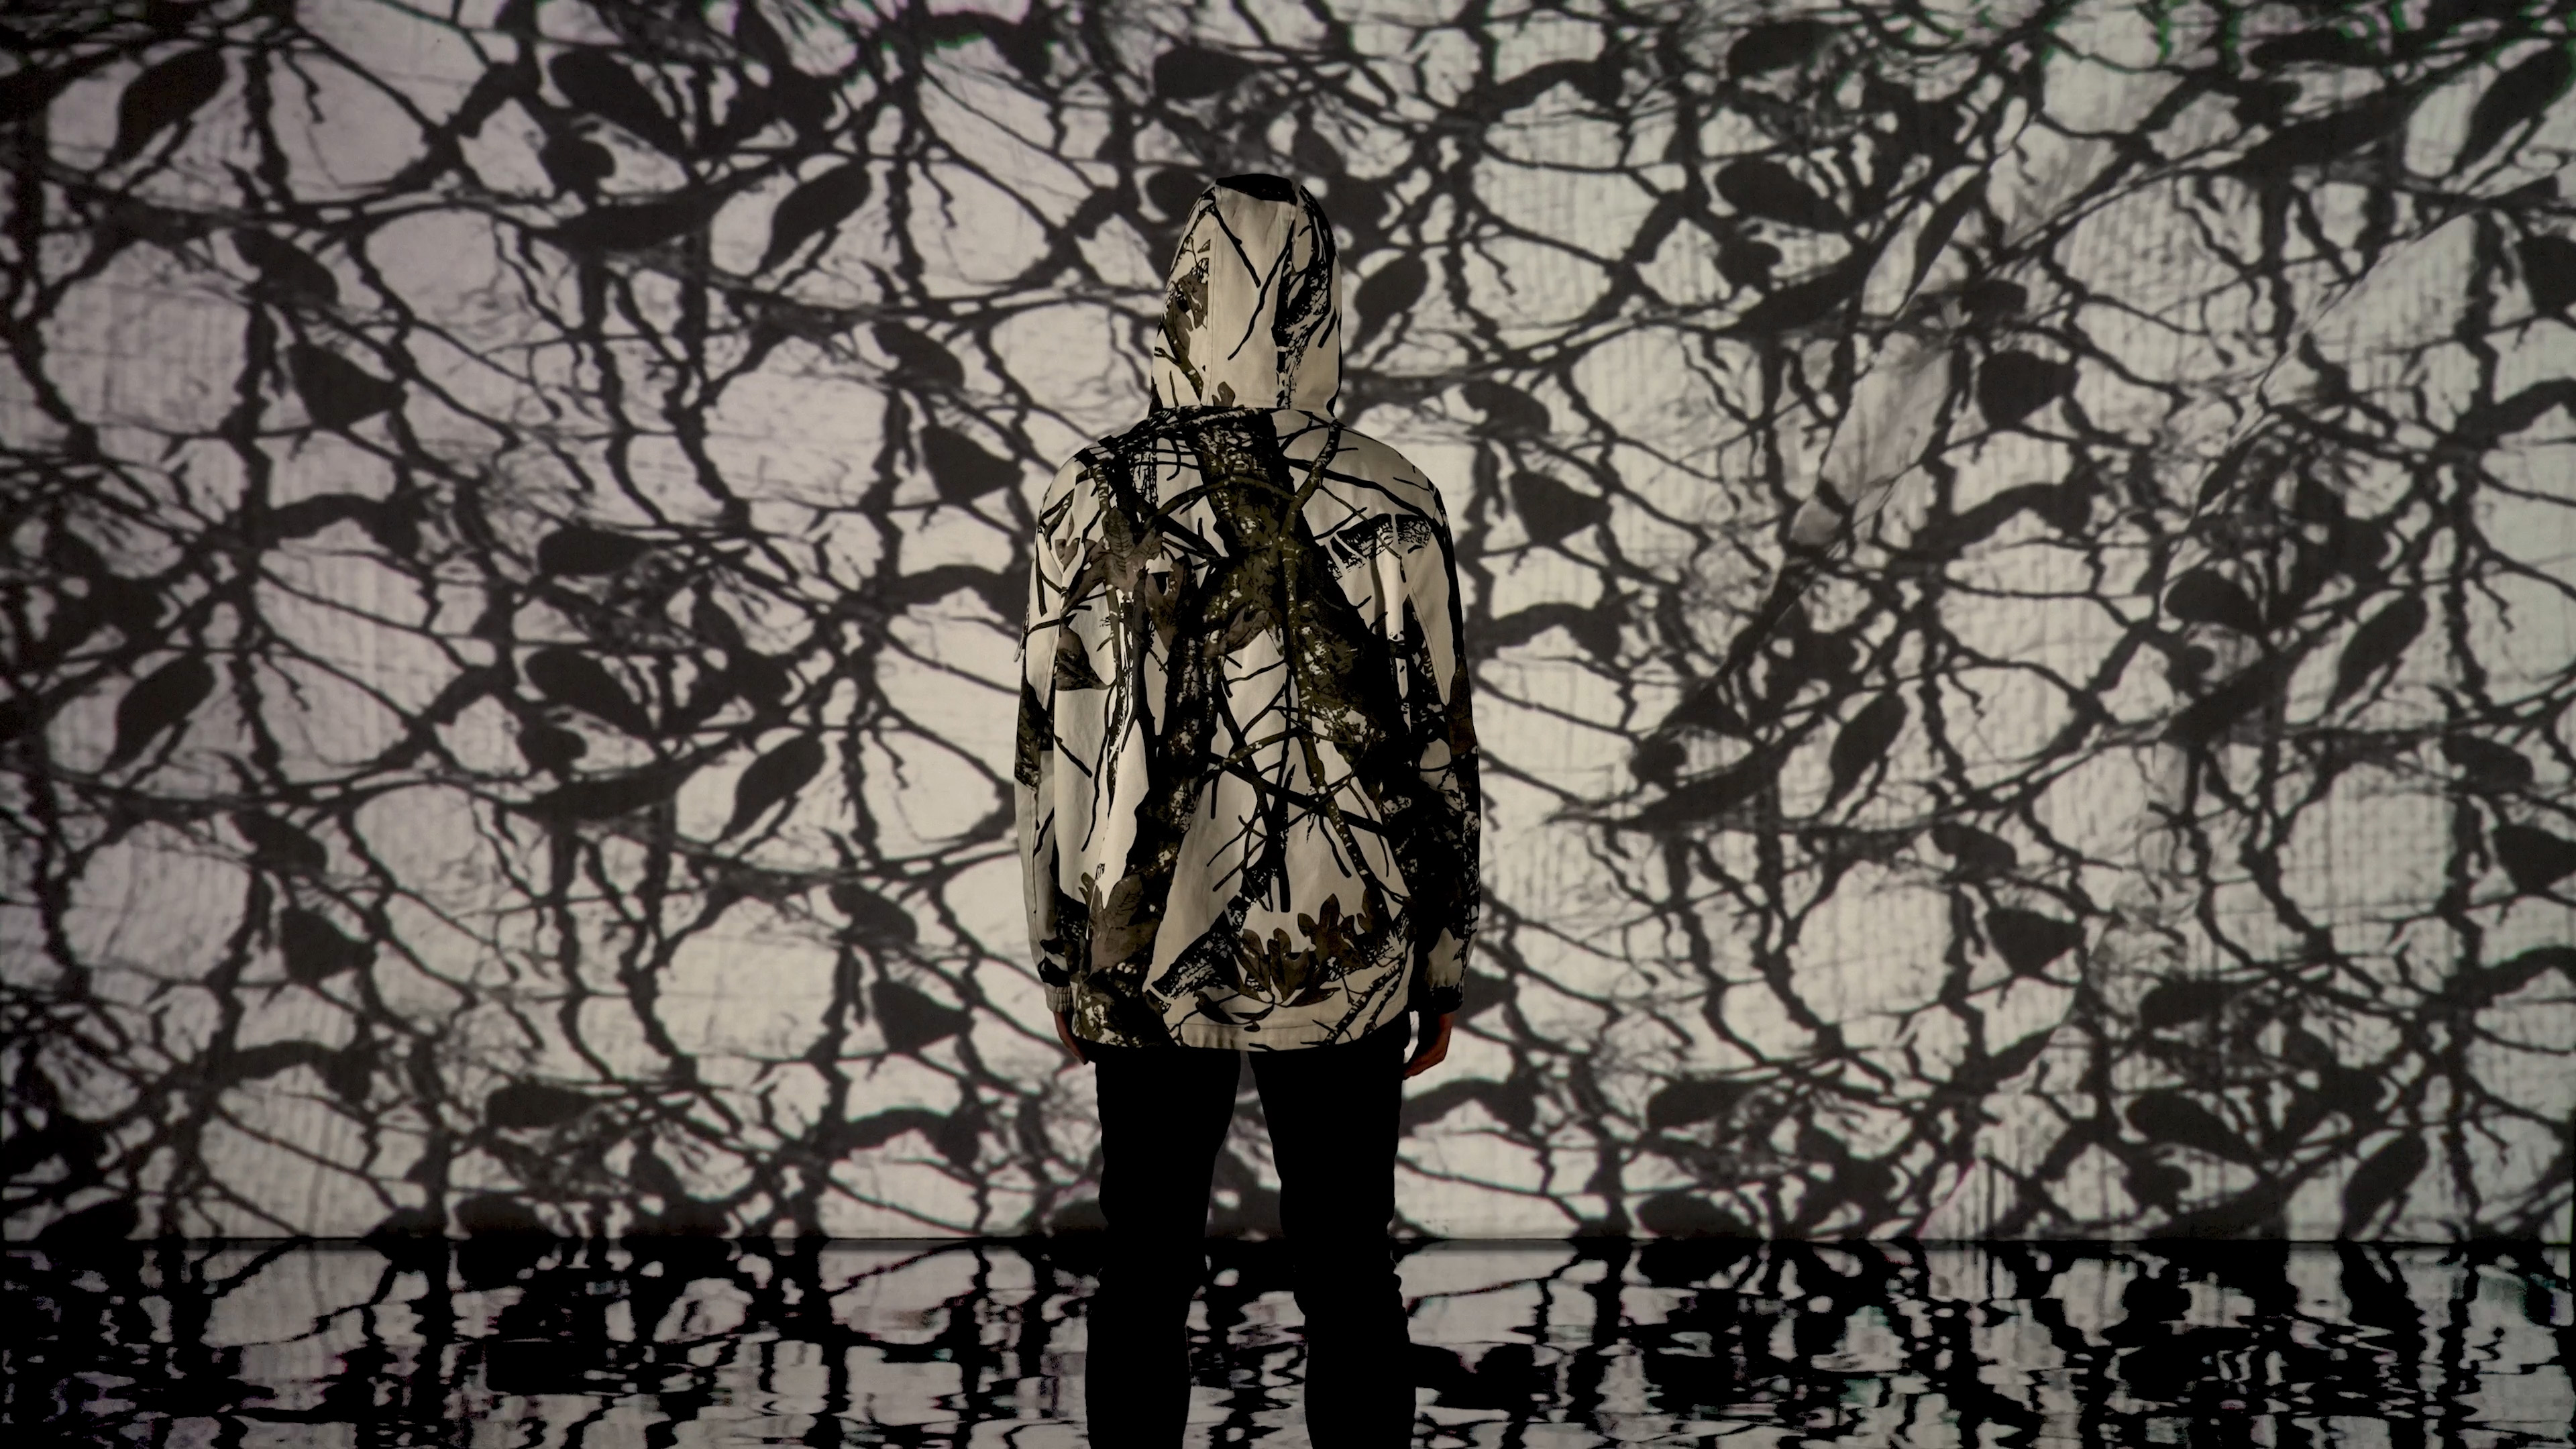 A person wearing a hoodie with a pattern out of tree branches in front of a projection screen that displays a similar pattern out of tree branches